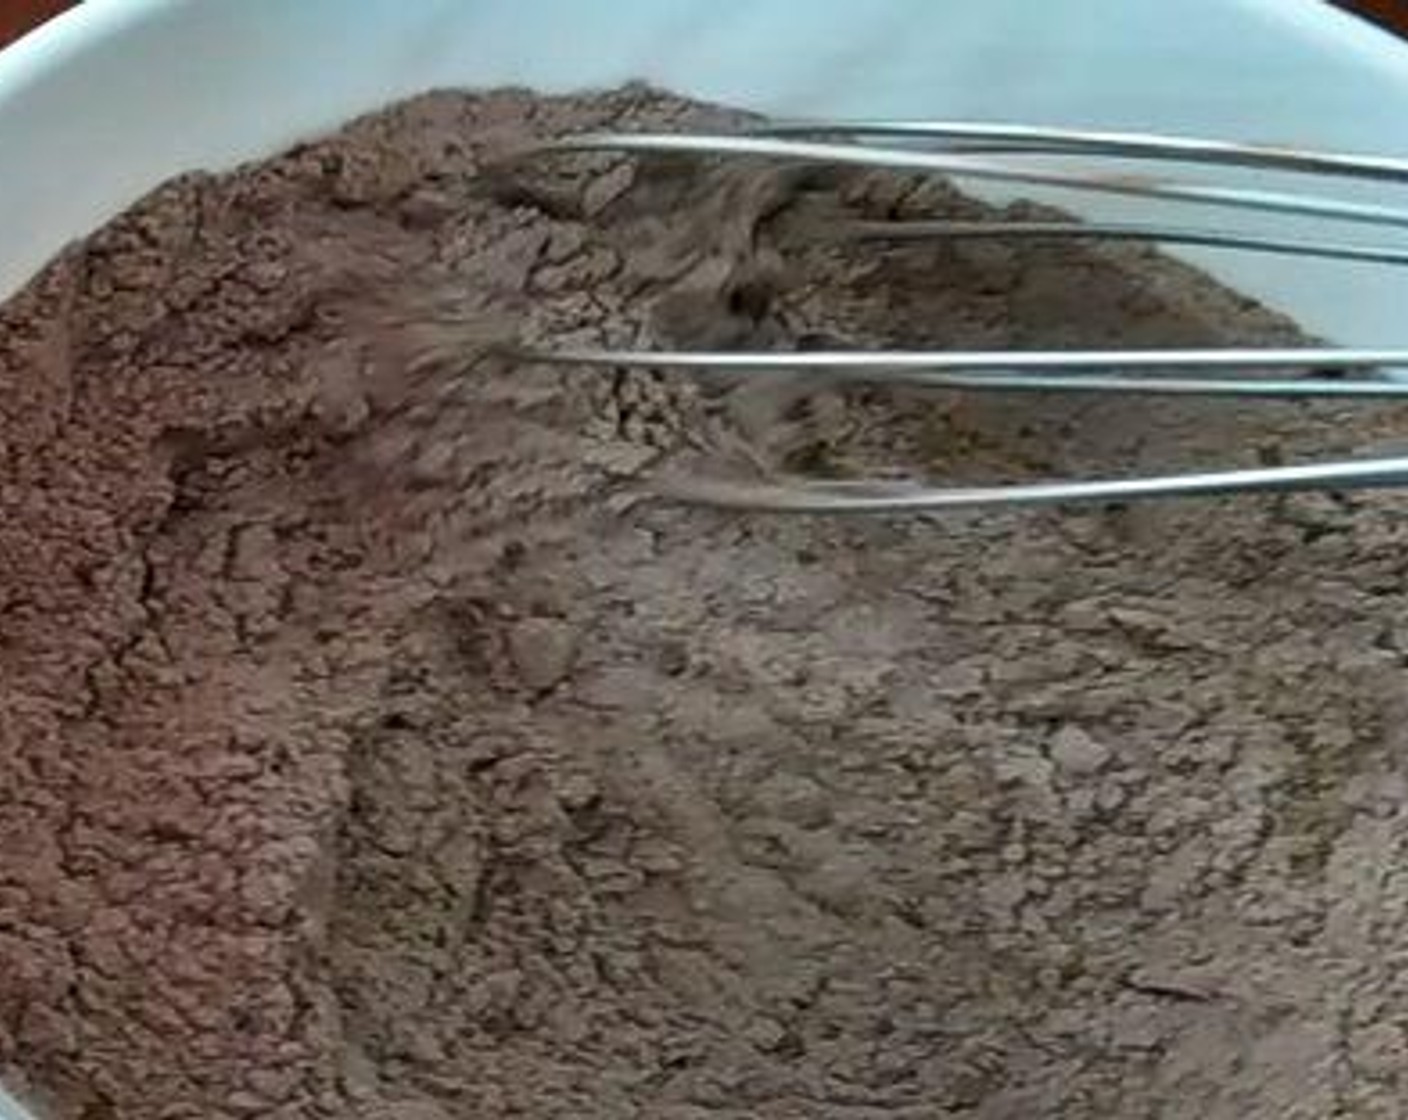 step 2 Combine Unsweetened Cocoa Powder (2 Tbsp) and All-Purpose Flour (3/4 cup).